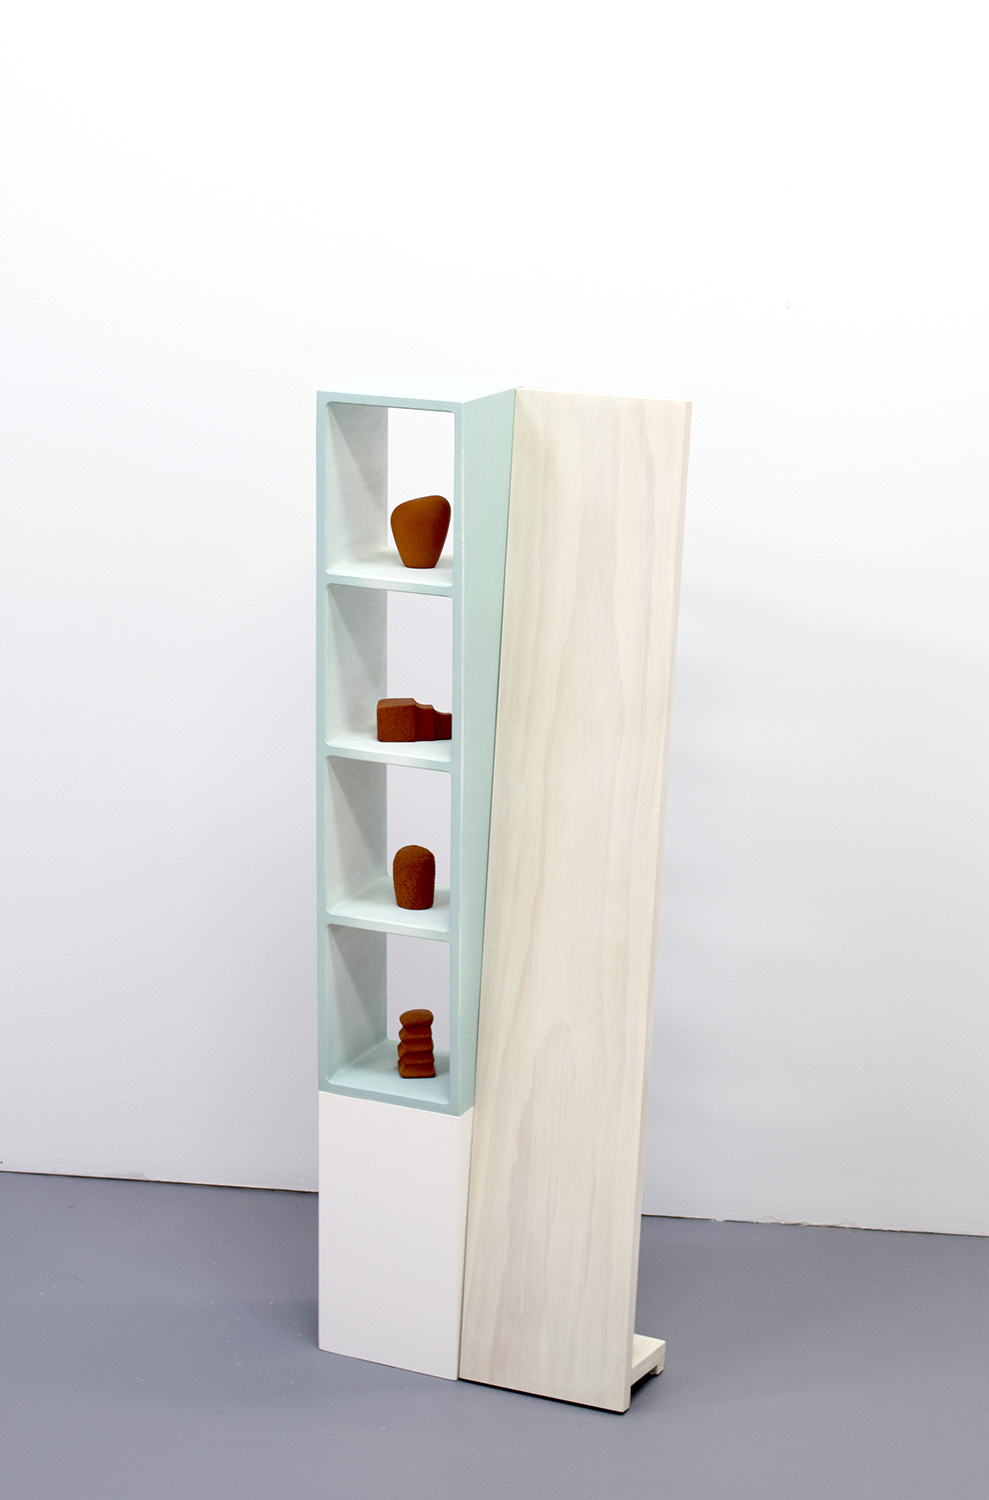   Meadow Daydream, &nbsp;2016  41 x 14 x6 inches  wood, ceramic, paint, and plastic 